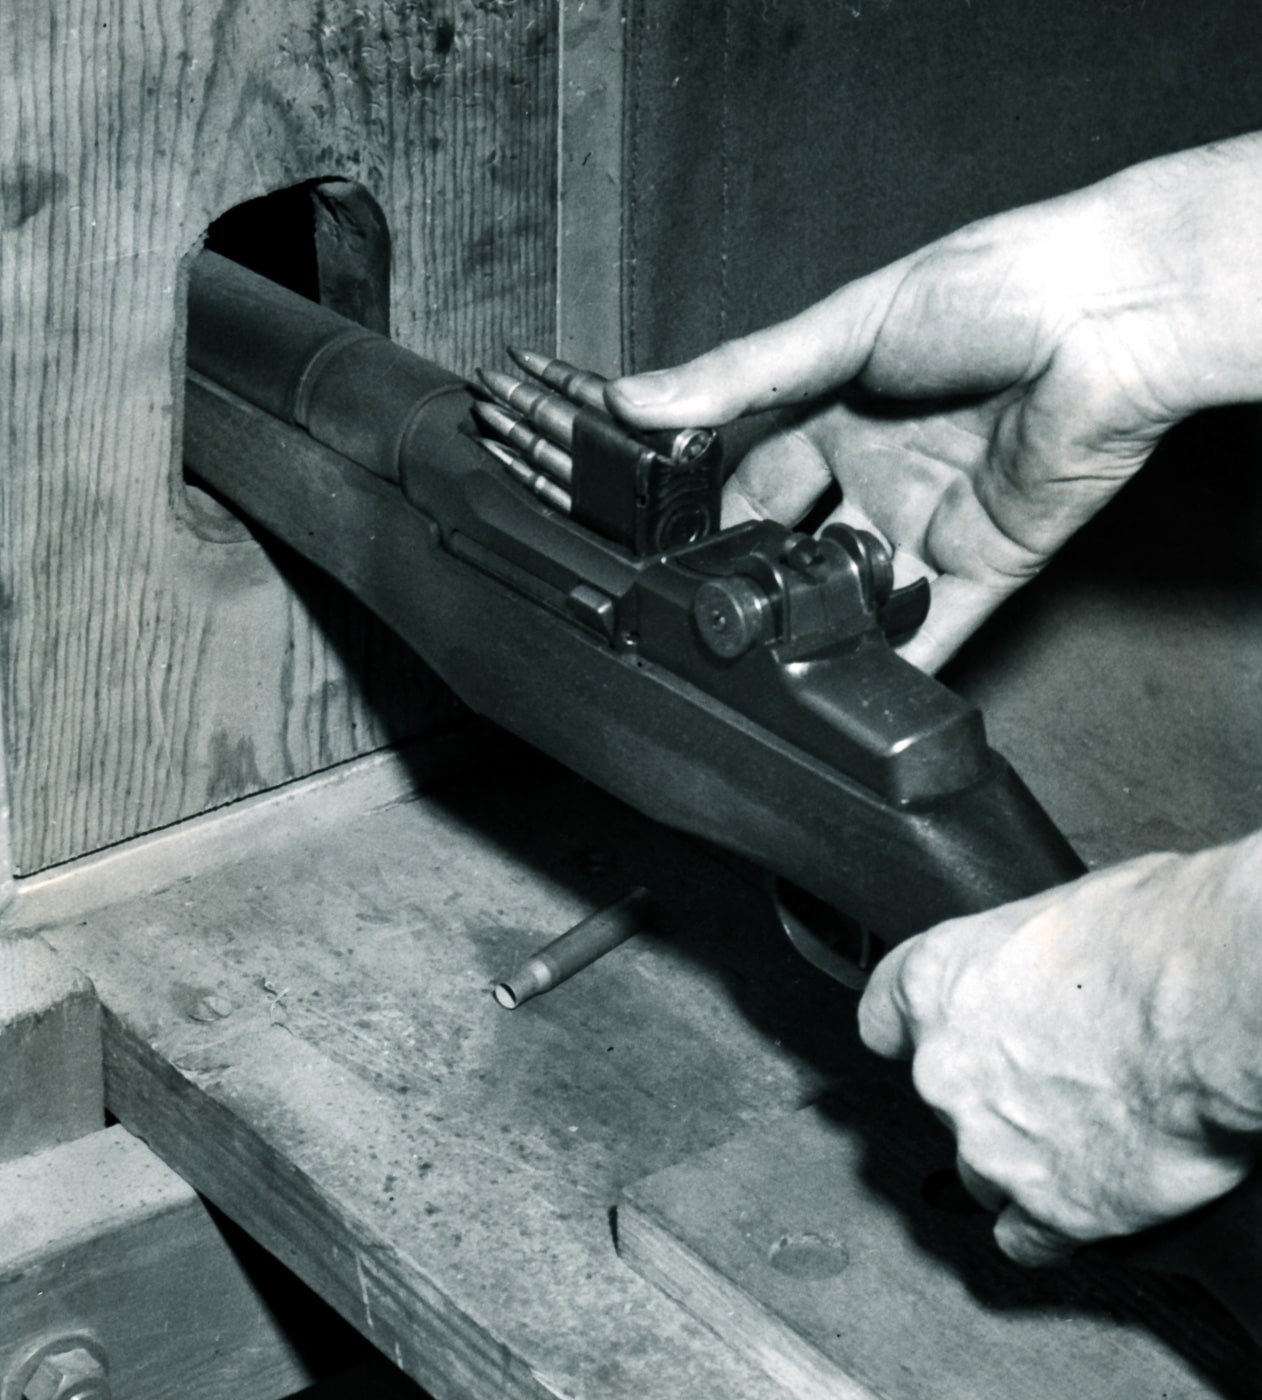 loading an en block clip into the m1 garand at the springfield armory